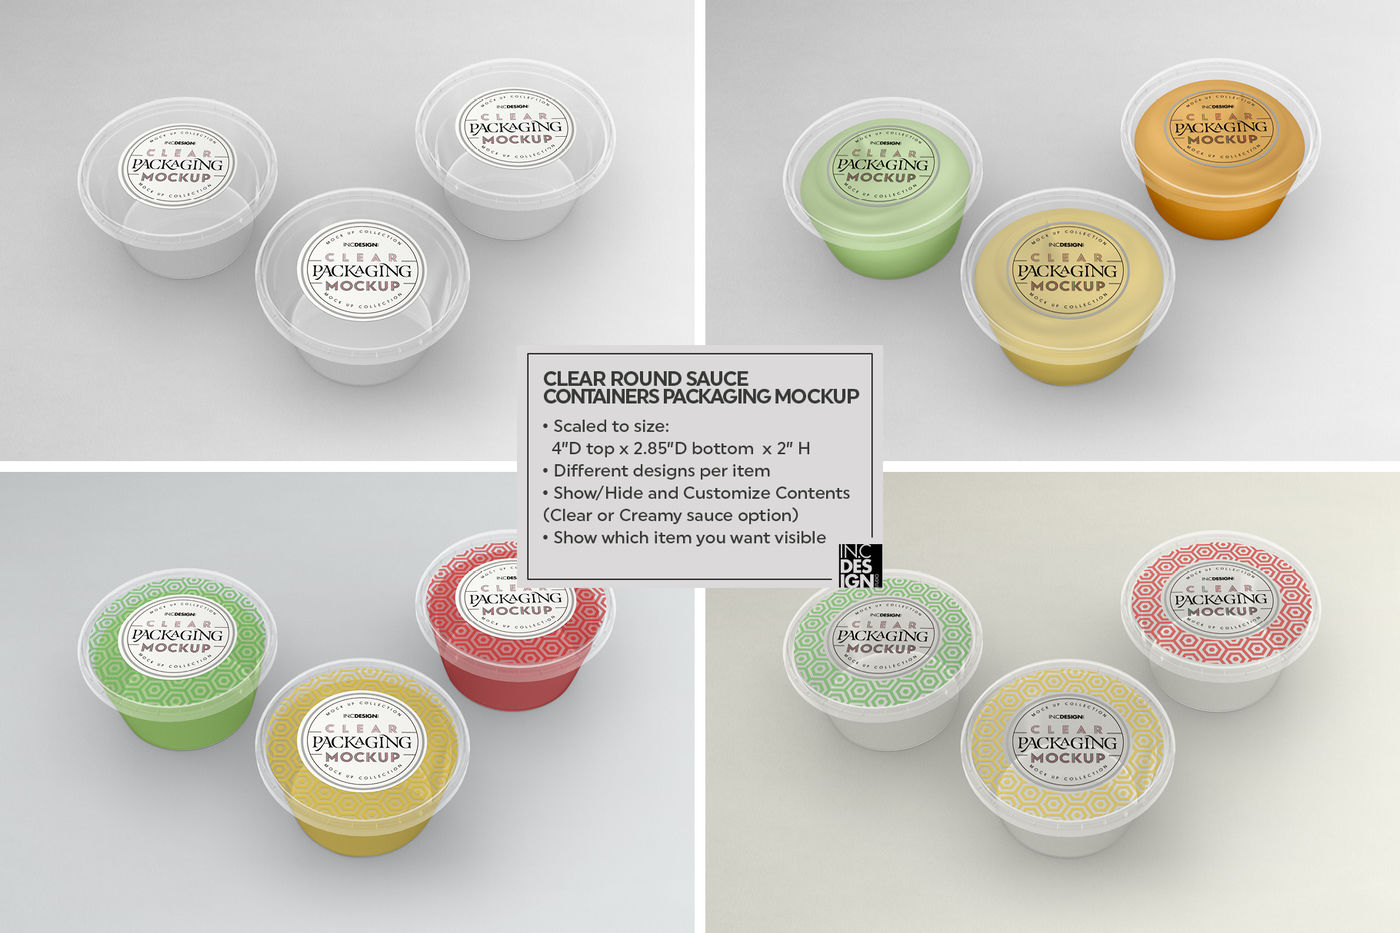 Download Clear Round Sauce Containers Packaging Mockup By Inc Design Studio Thehungryjpeg Com